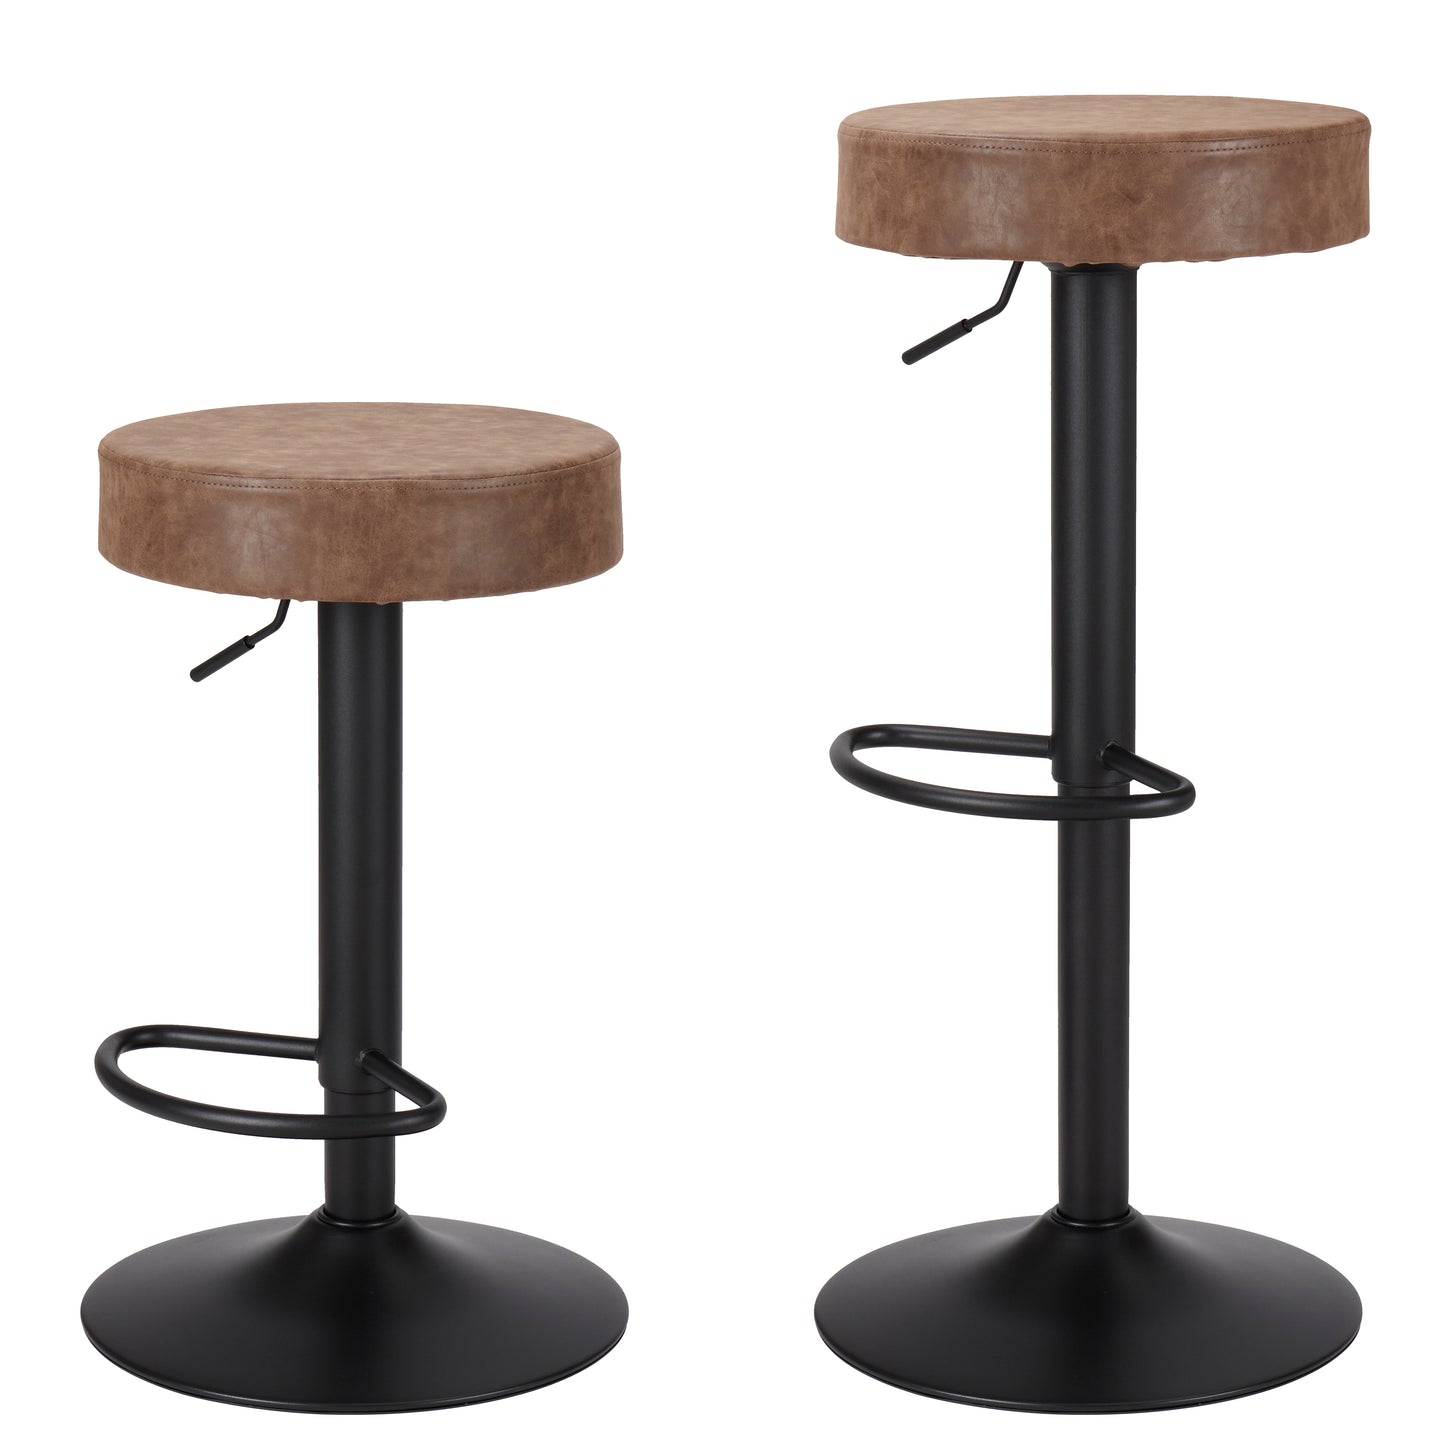 Finnhomy Bar Stools Set of 2 Counter Height, Swivel Barstools with Footrest and Backless Round, Height Adjustable Modern Bar stools for Kitchen, Vintage Leather, Retro Brown